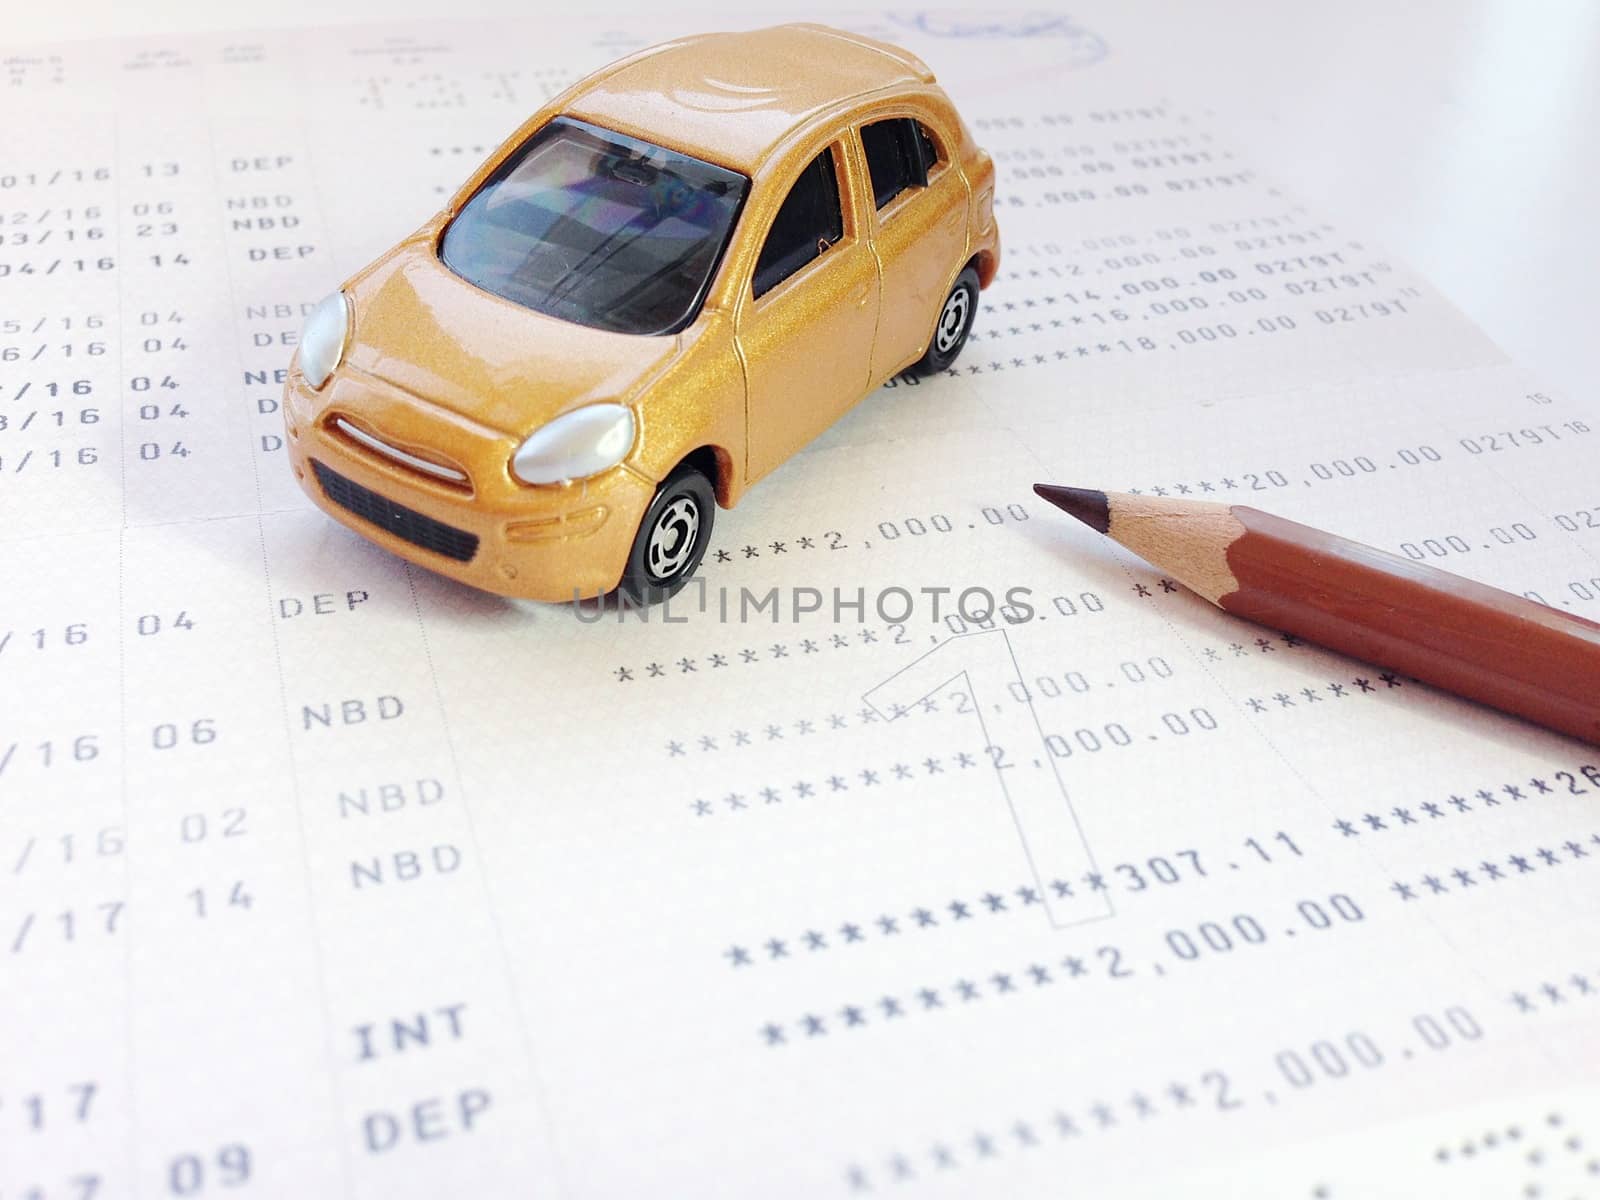 Business, finance, savings, banking or car loan concept : Miniature car model, pencil and savings account passbook or financial statement on white background